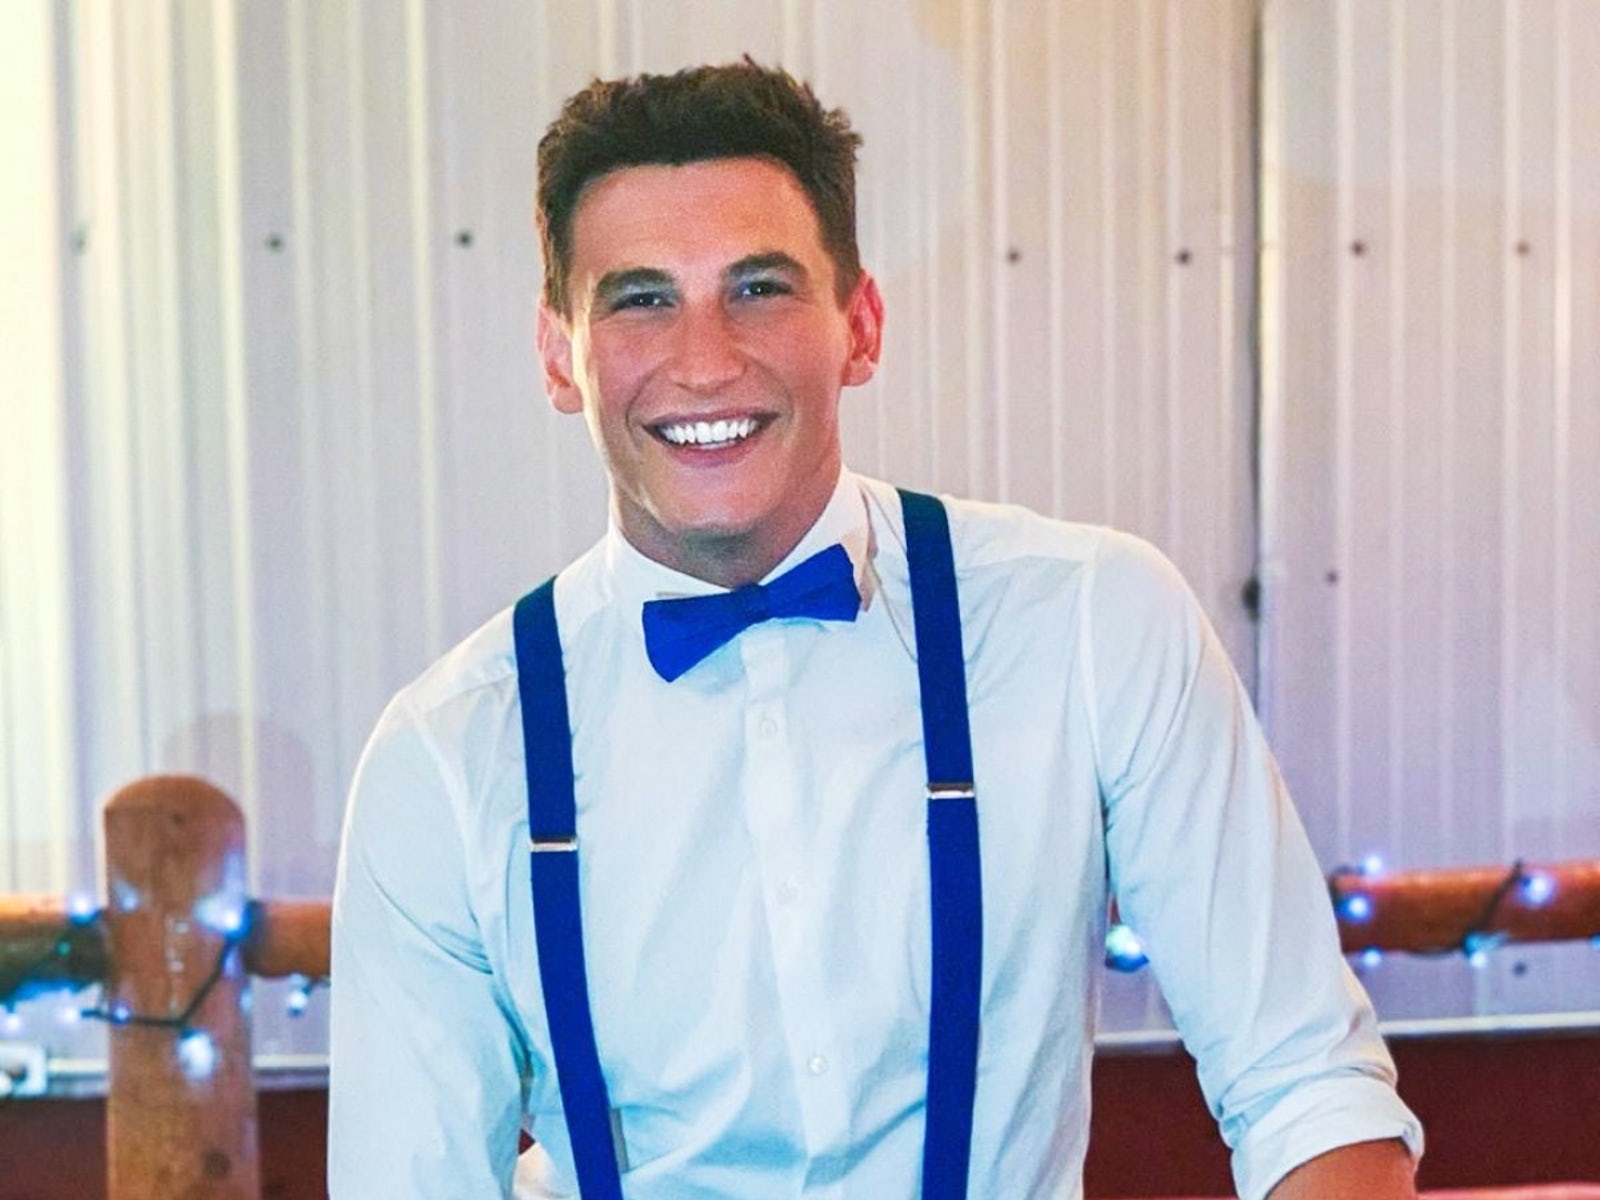 Blake Horstmann will reportedly be the center of drama on 'Bachelor in